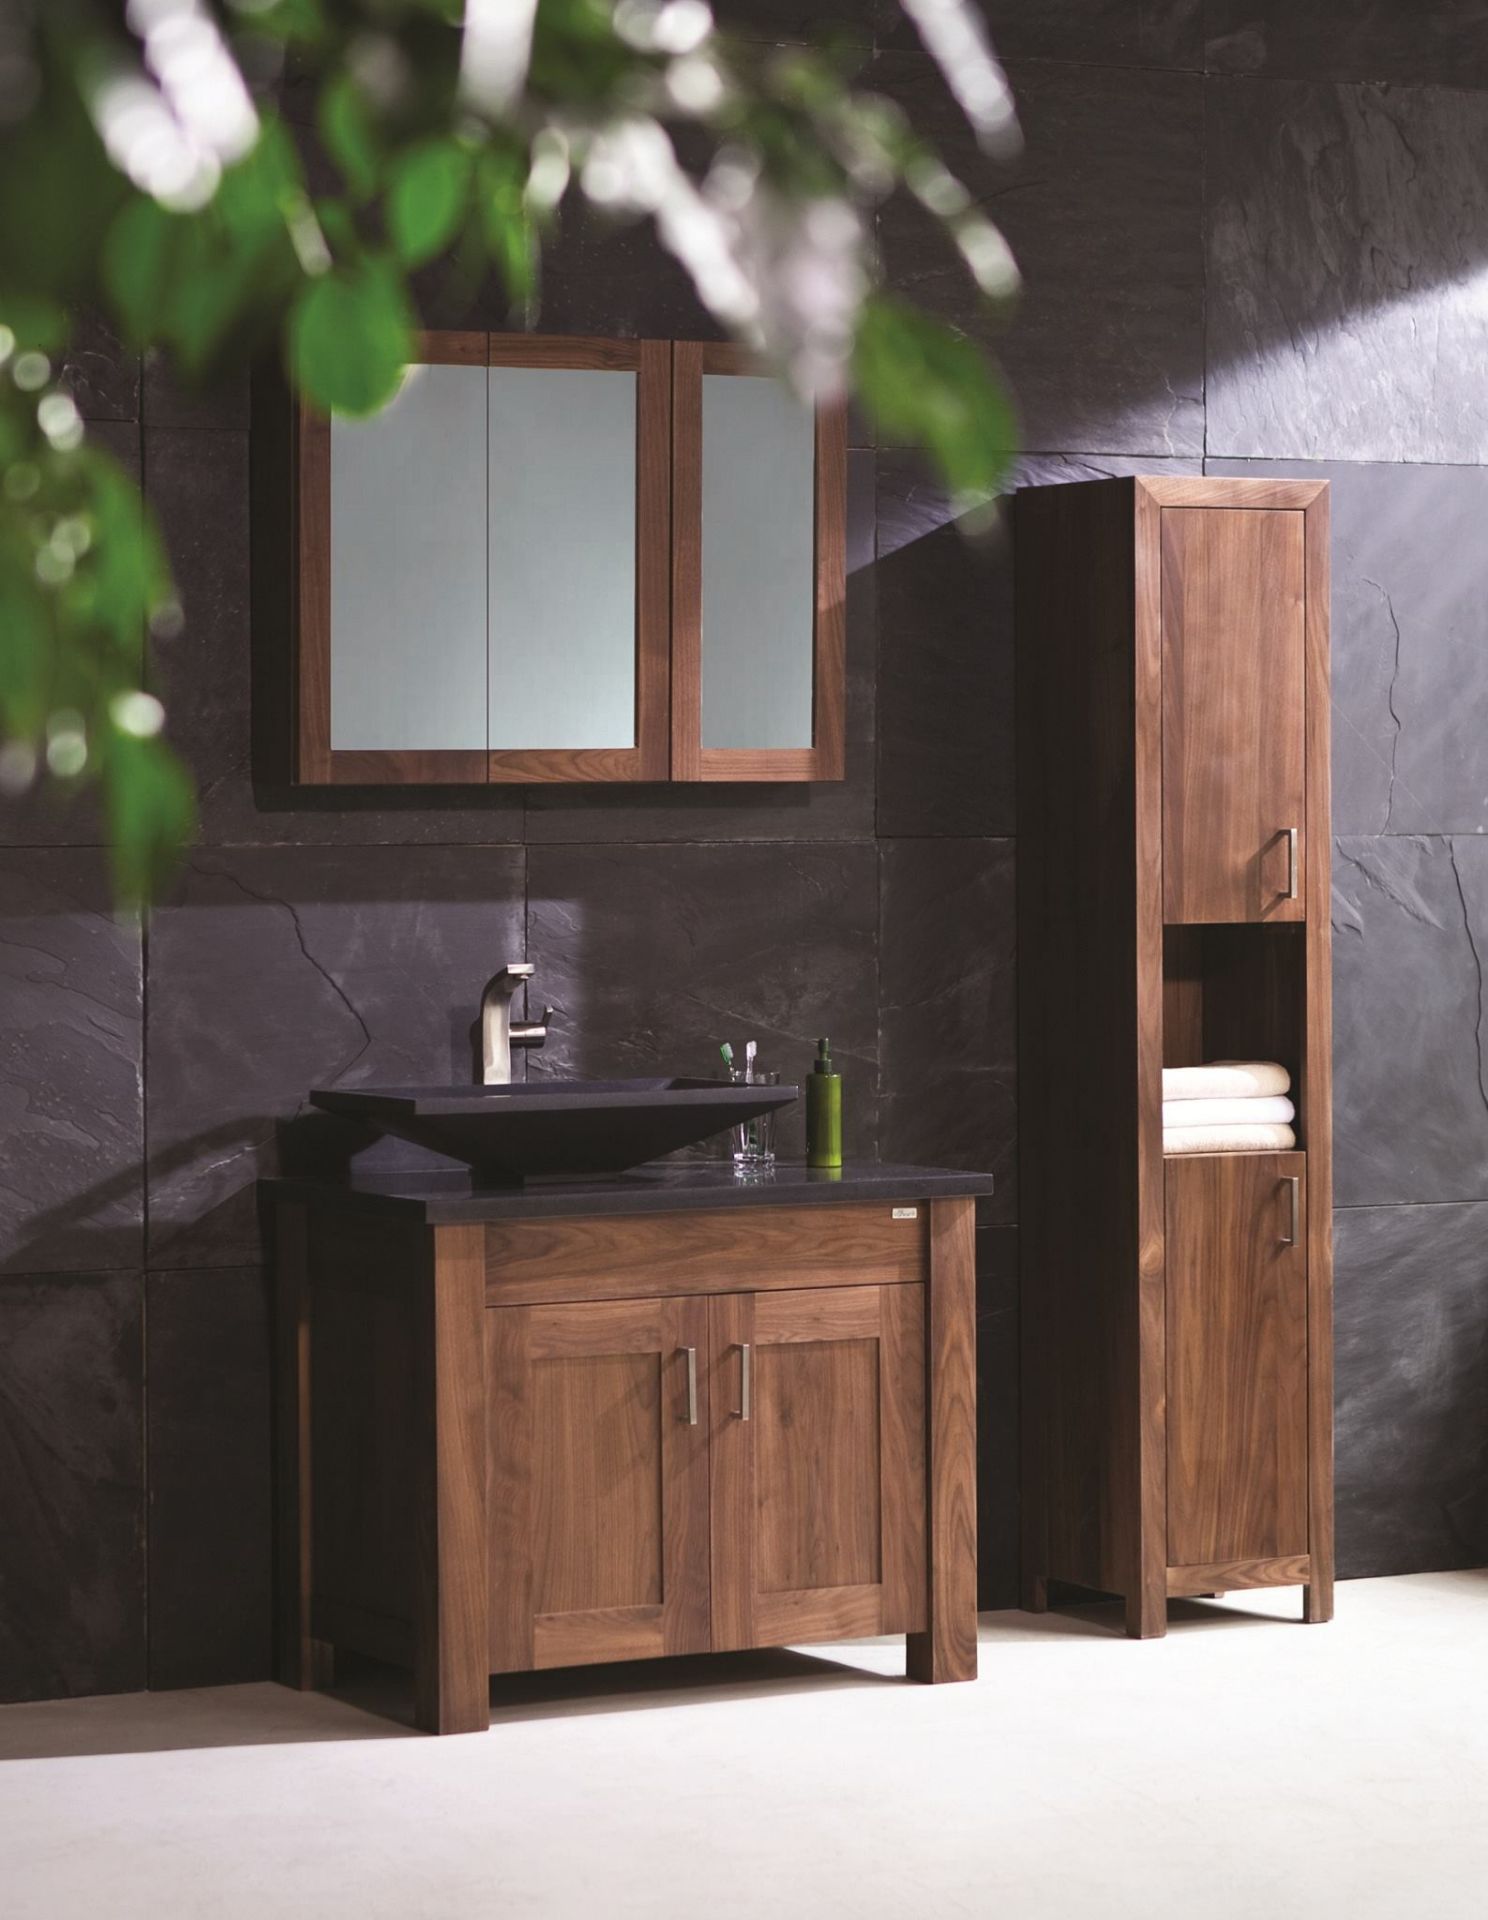 1 x Stonearth 'Finesse' Countertop Washstand - American Solid Walnut - Original RRP £1,400 - Image 5 of 10